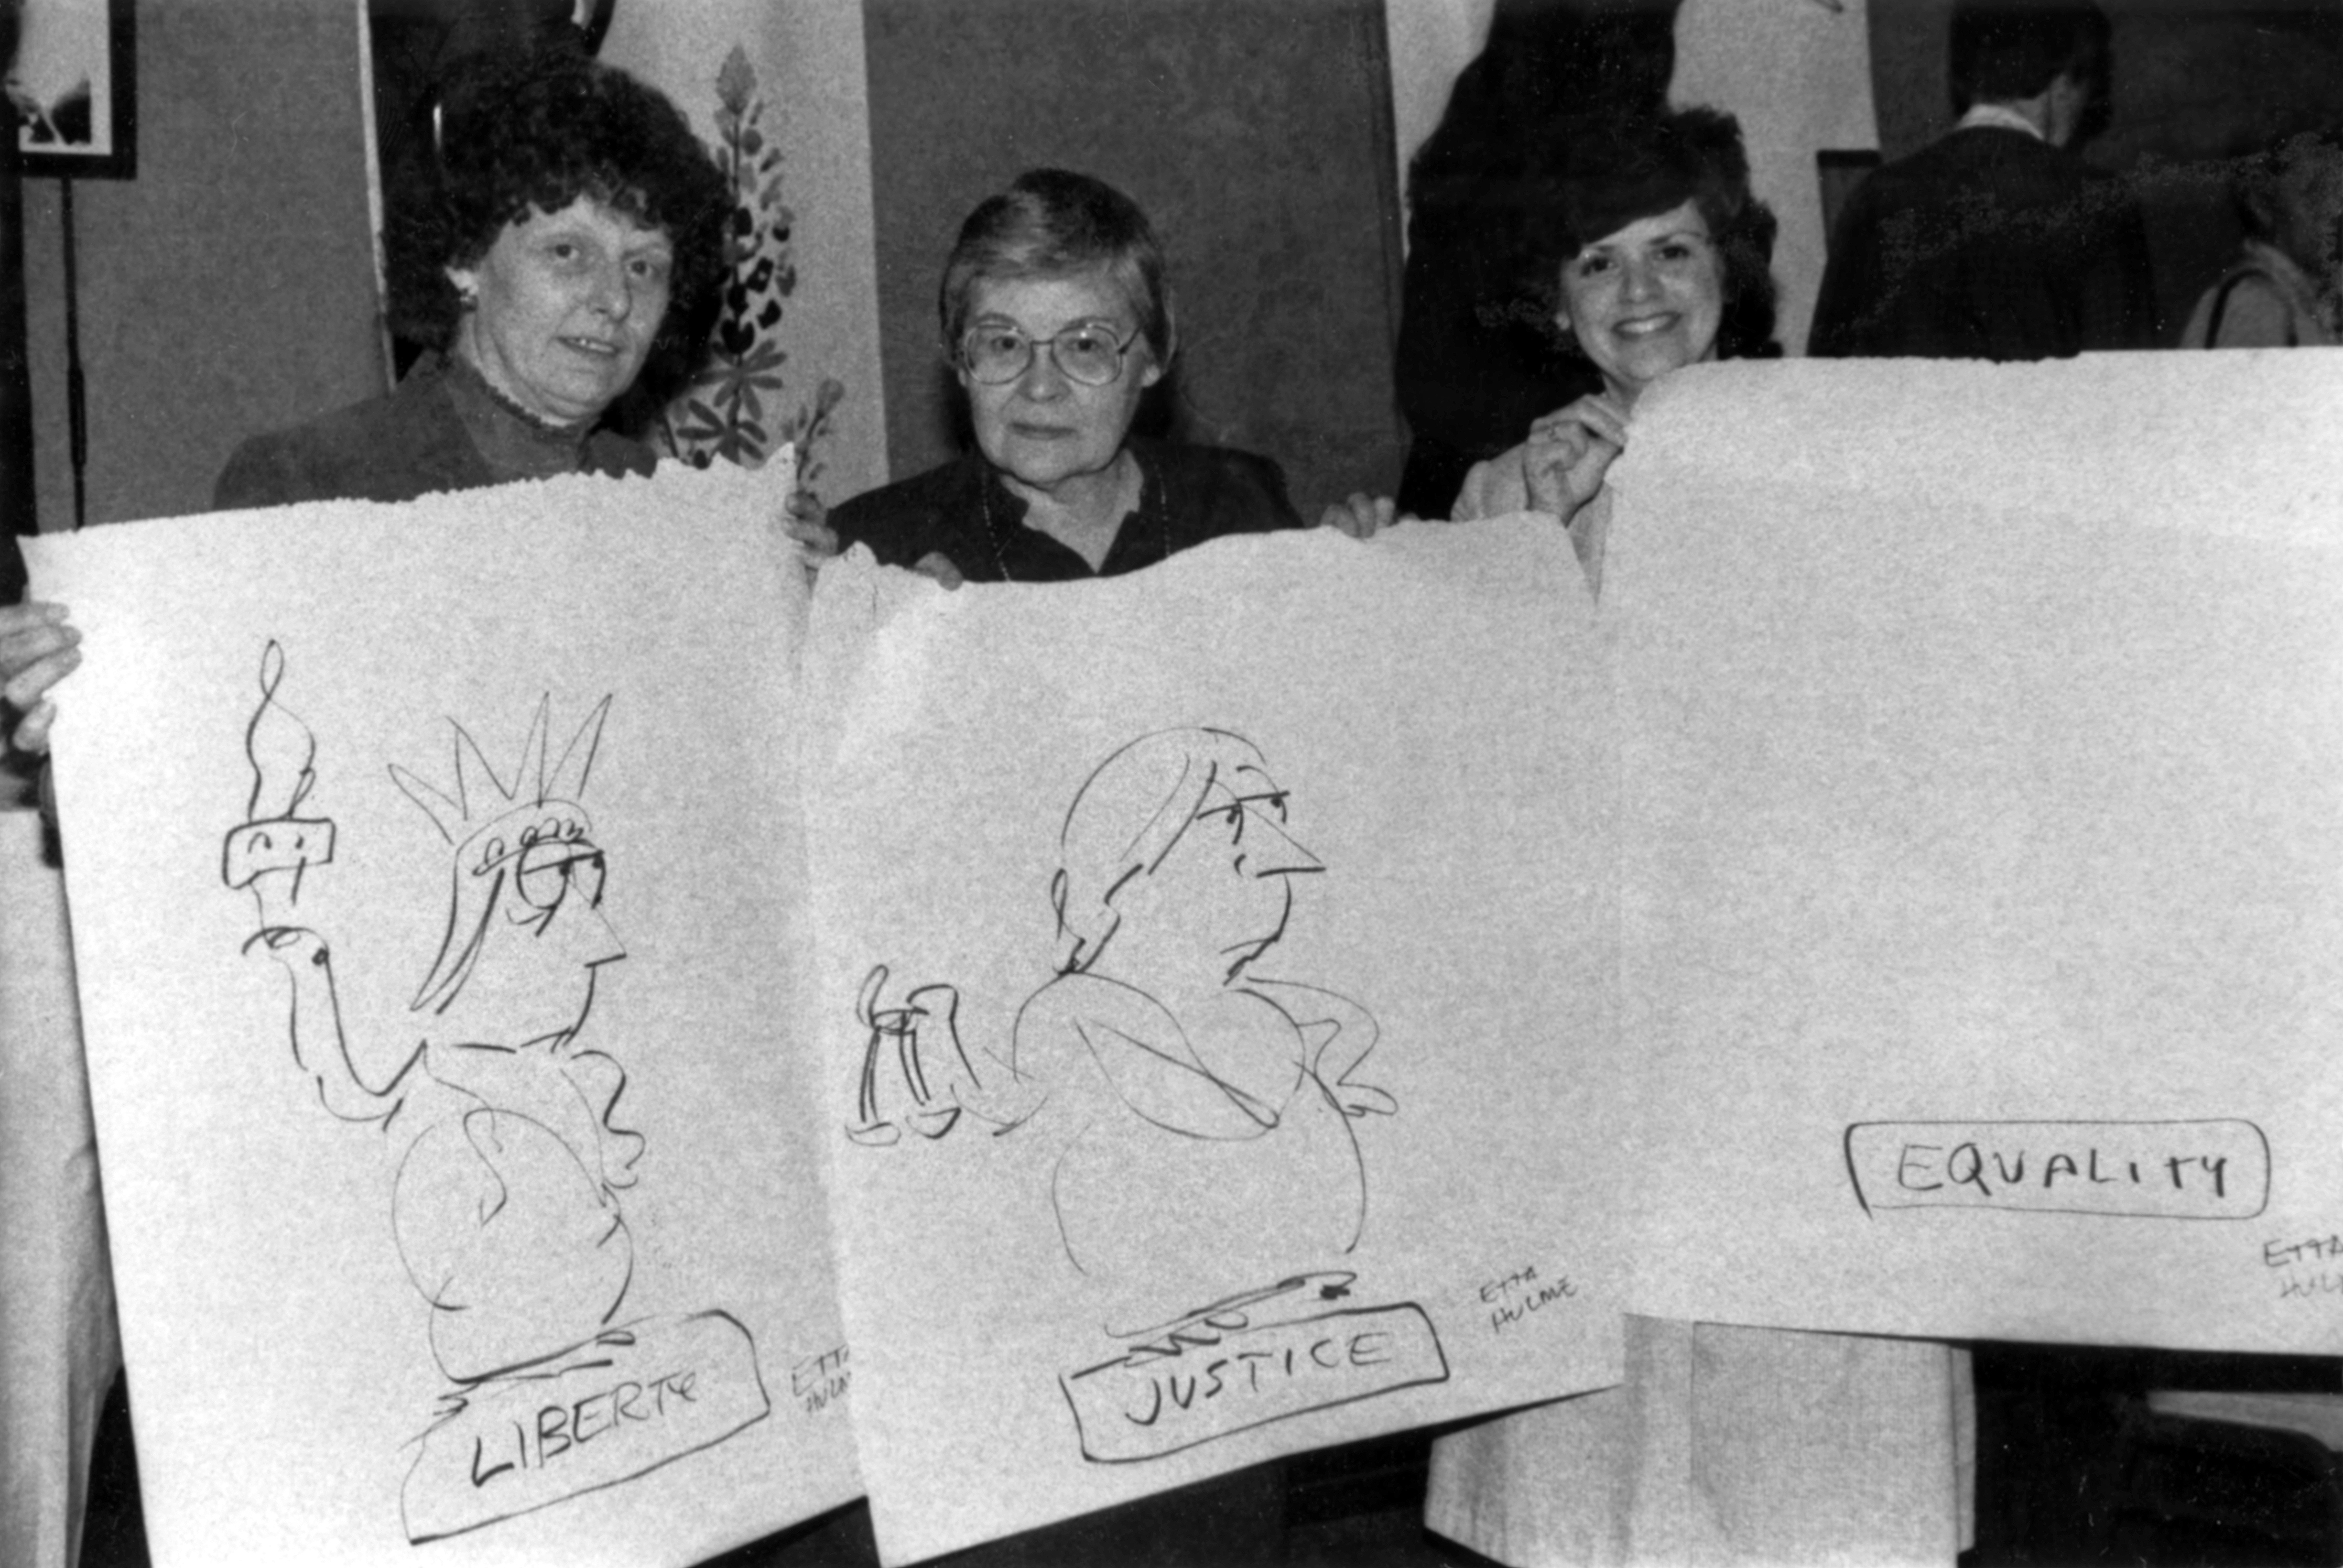 Three women display cartoons drawn by Etta Hulme, Fort Worth Star-Telegram editorial cartoonist, which depict “Liberty, Justice, Equality”